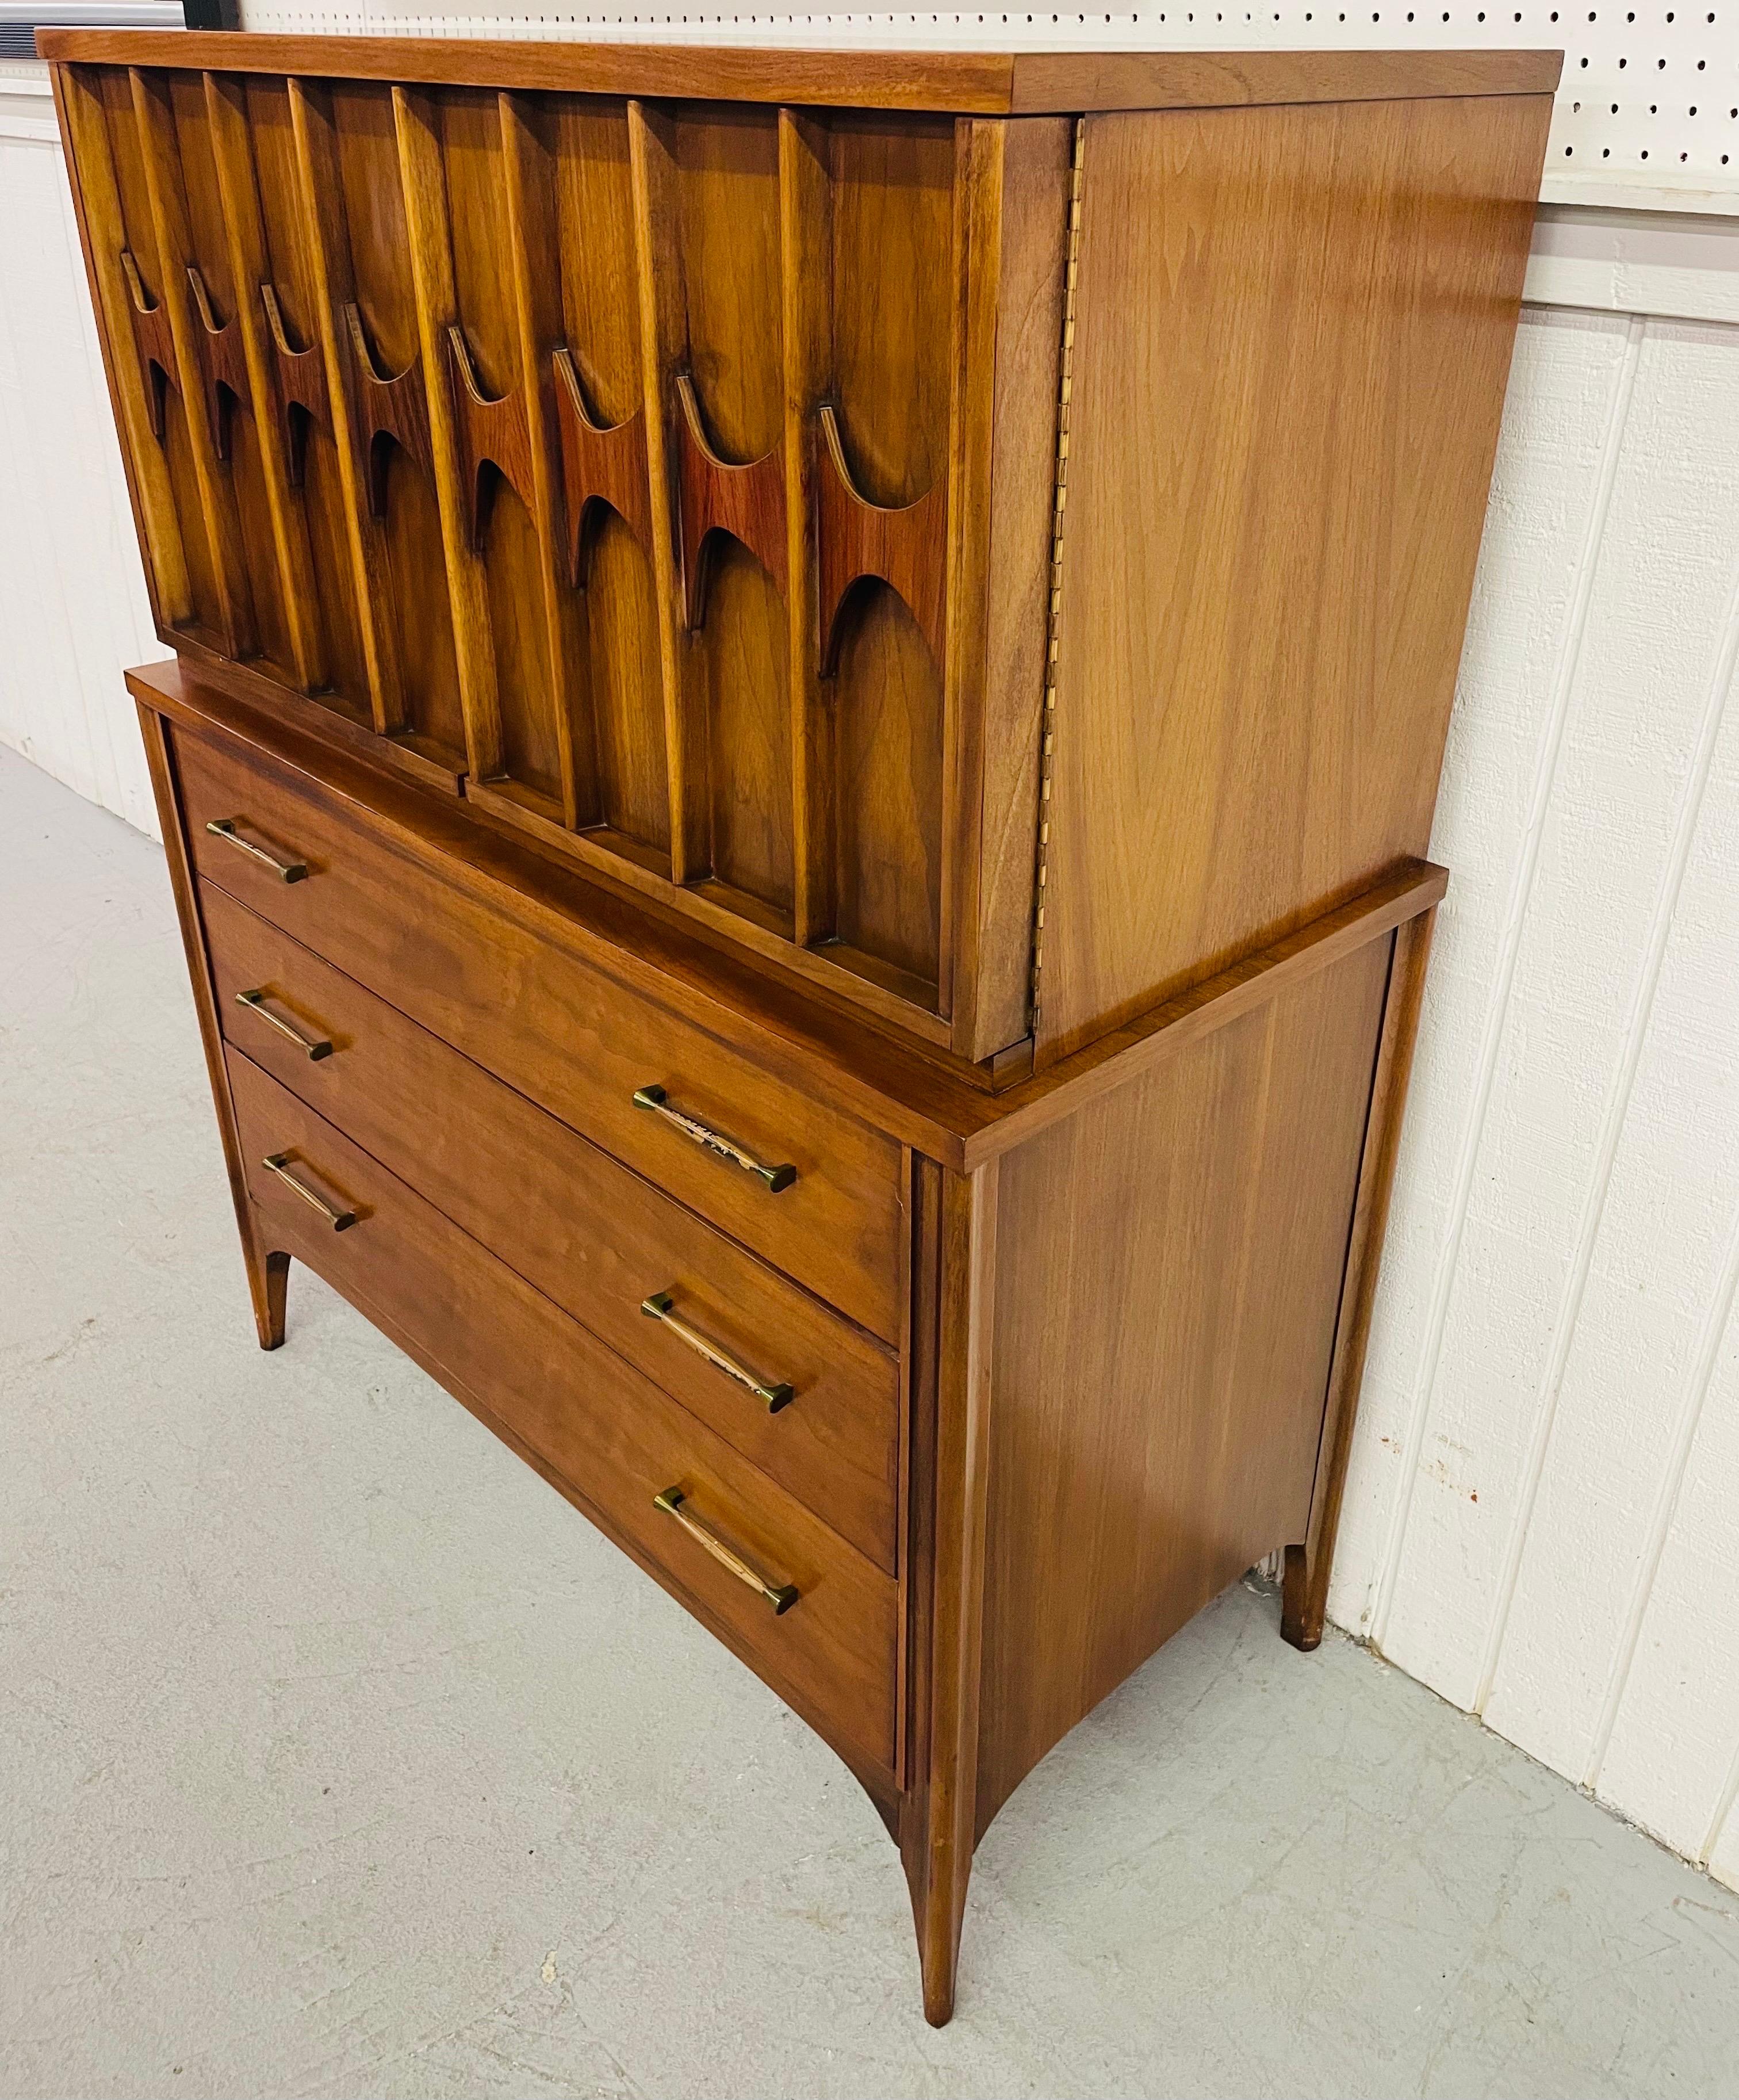 This listing is for a mid-century Kent Coffey Perspecta walnut gentlemen’s chest. Featuring two doors with carved rosewood pulls, two hidden drawers and one shelf behind the doors, three drawers at the bottom with original hardware, and a beautiful